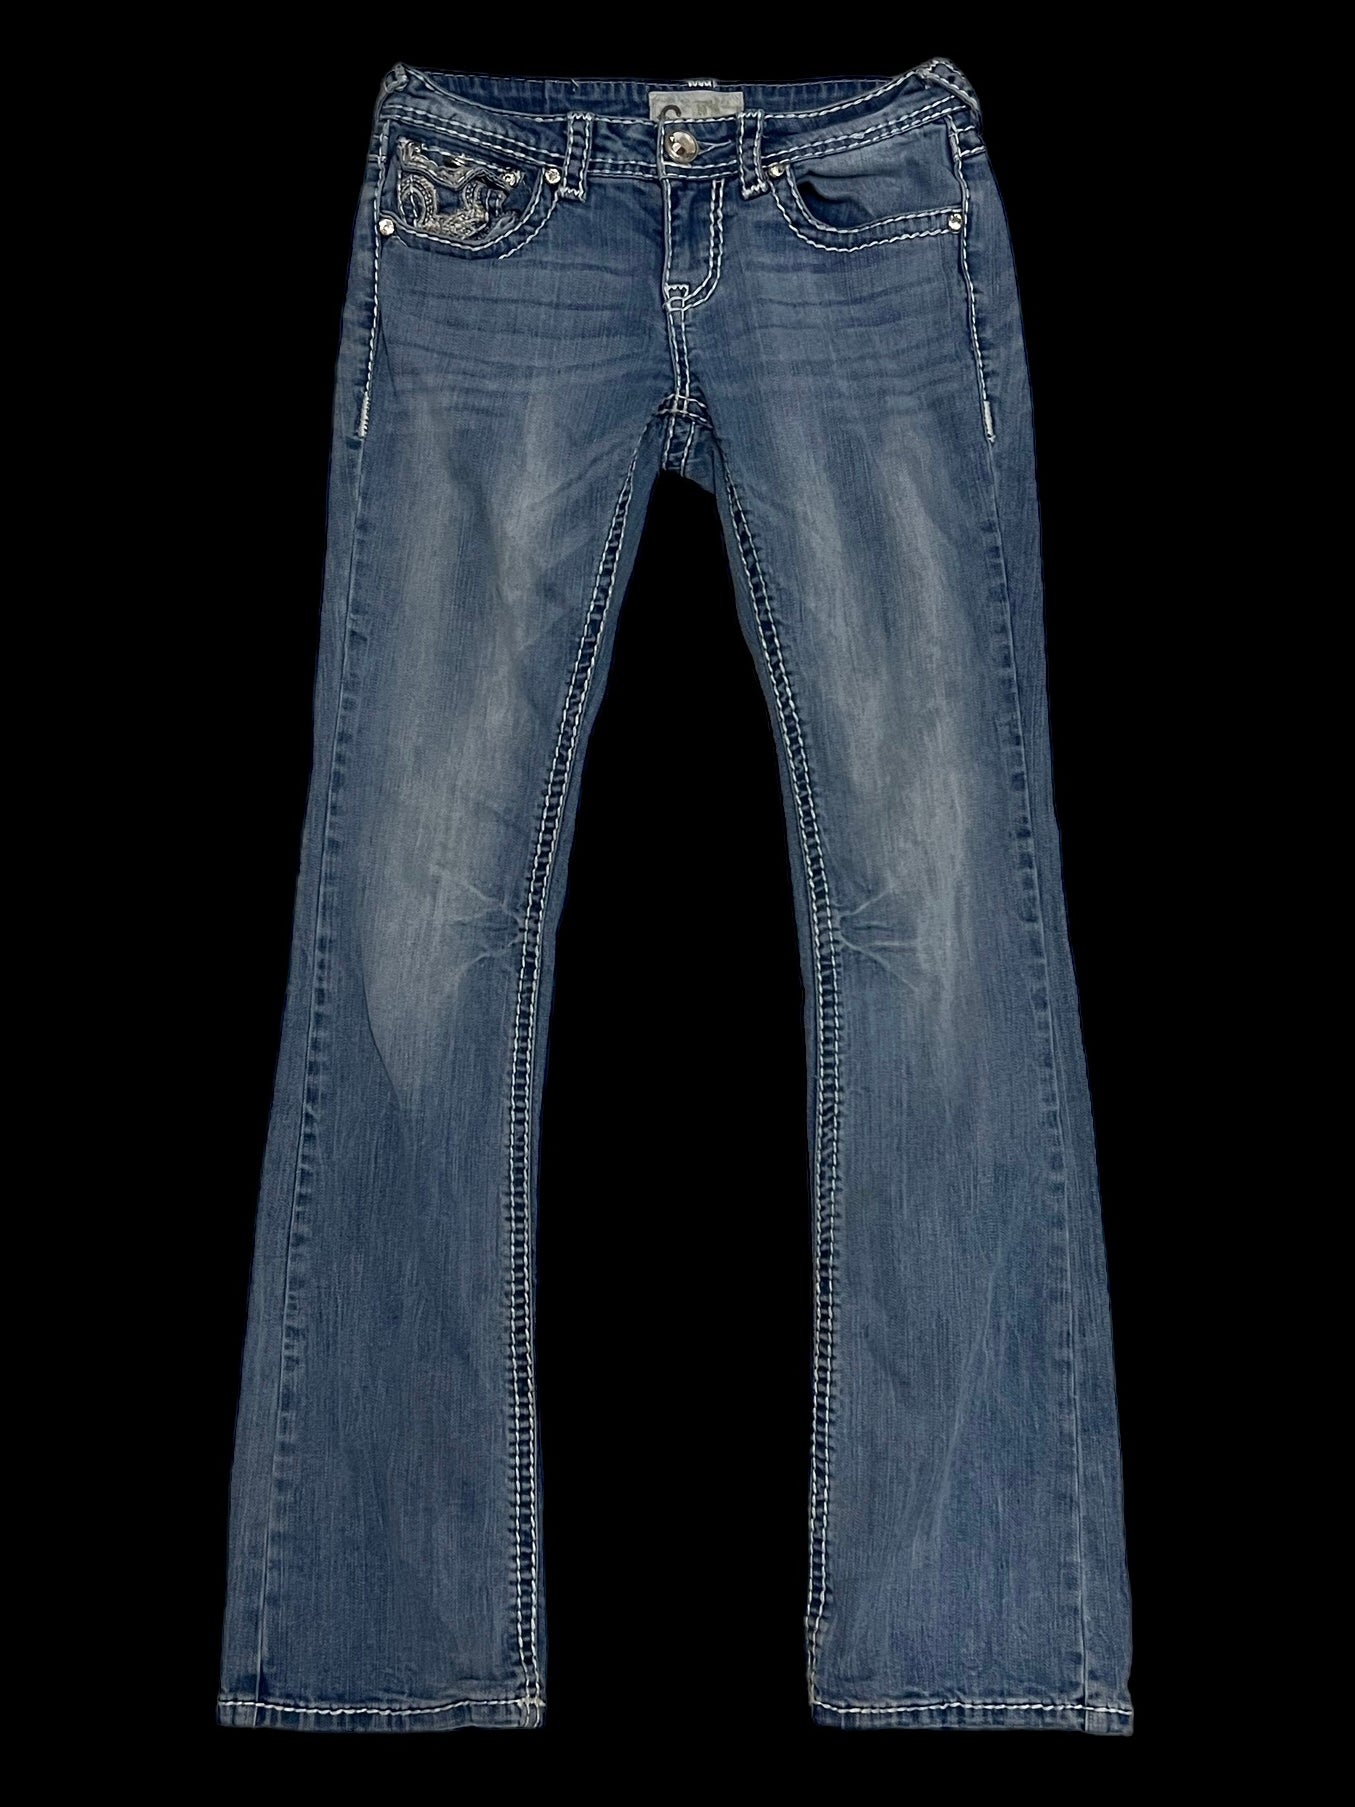 Stylo, Jeans, Stylo Faded Thick Stitch Lowrise Denim Jeans Mens Or Womens